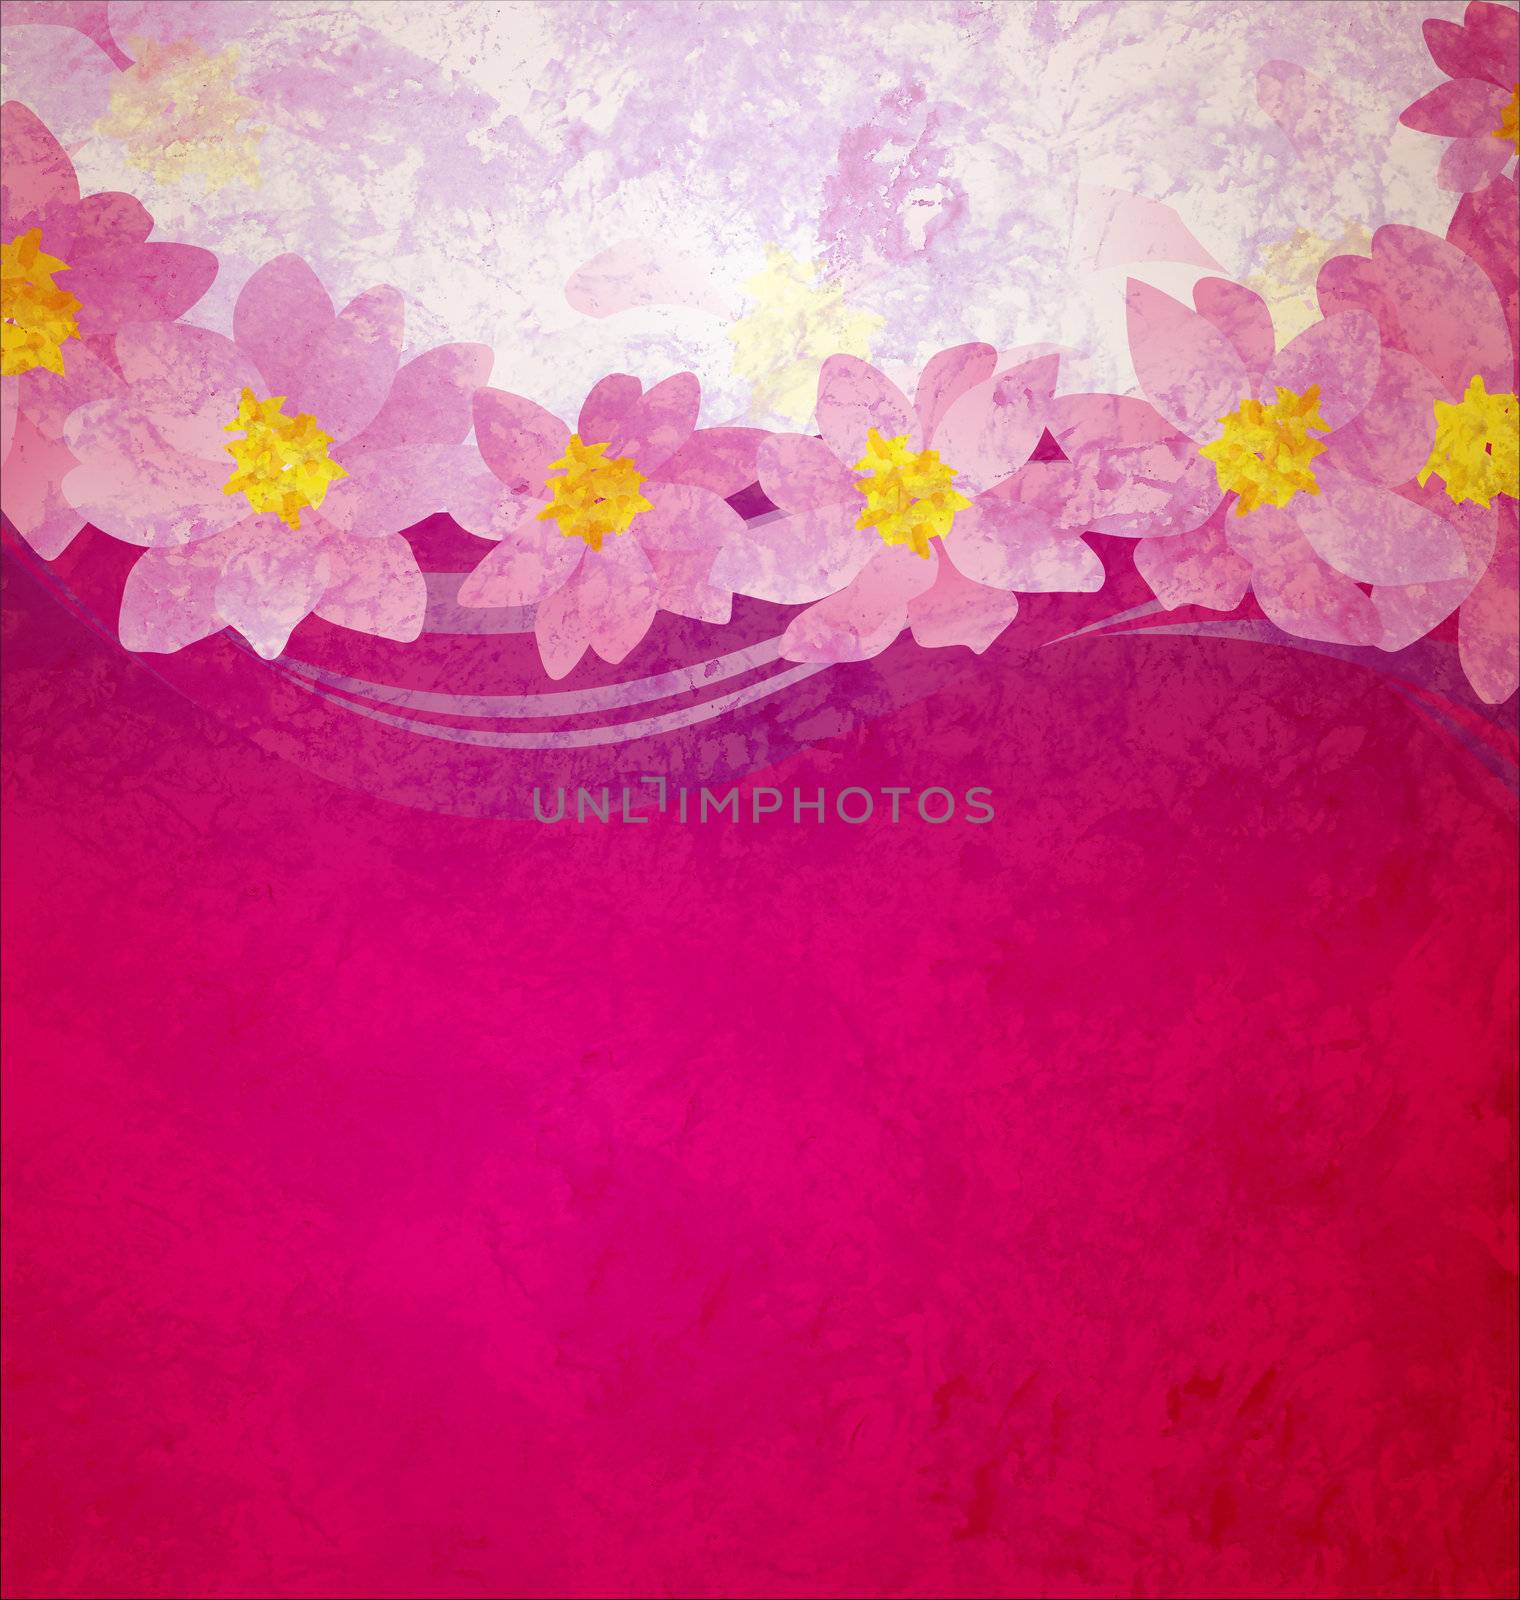 colorful grunge pink magenta and violet background with fantasy  by CherJu